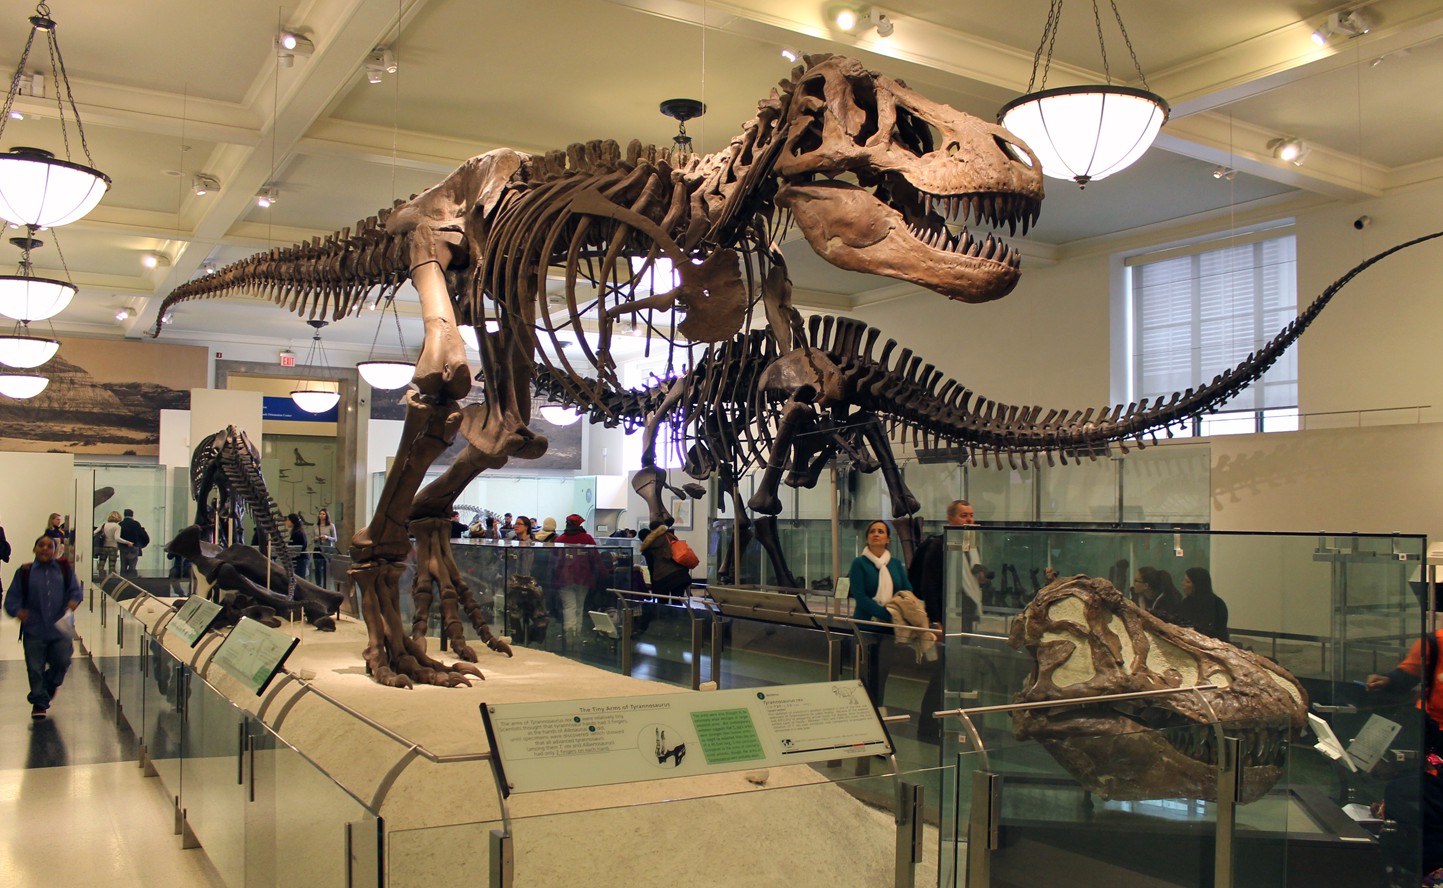 American Museum of Natural History - The Best?